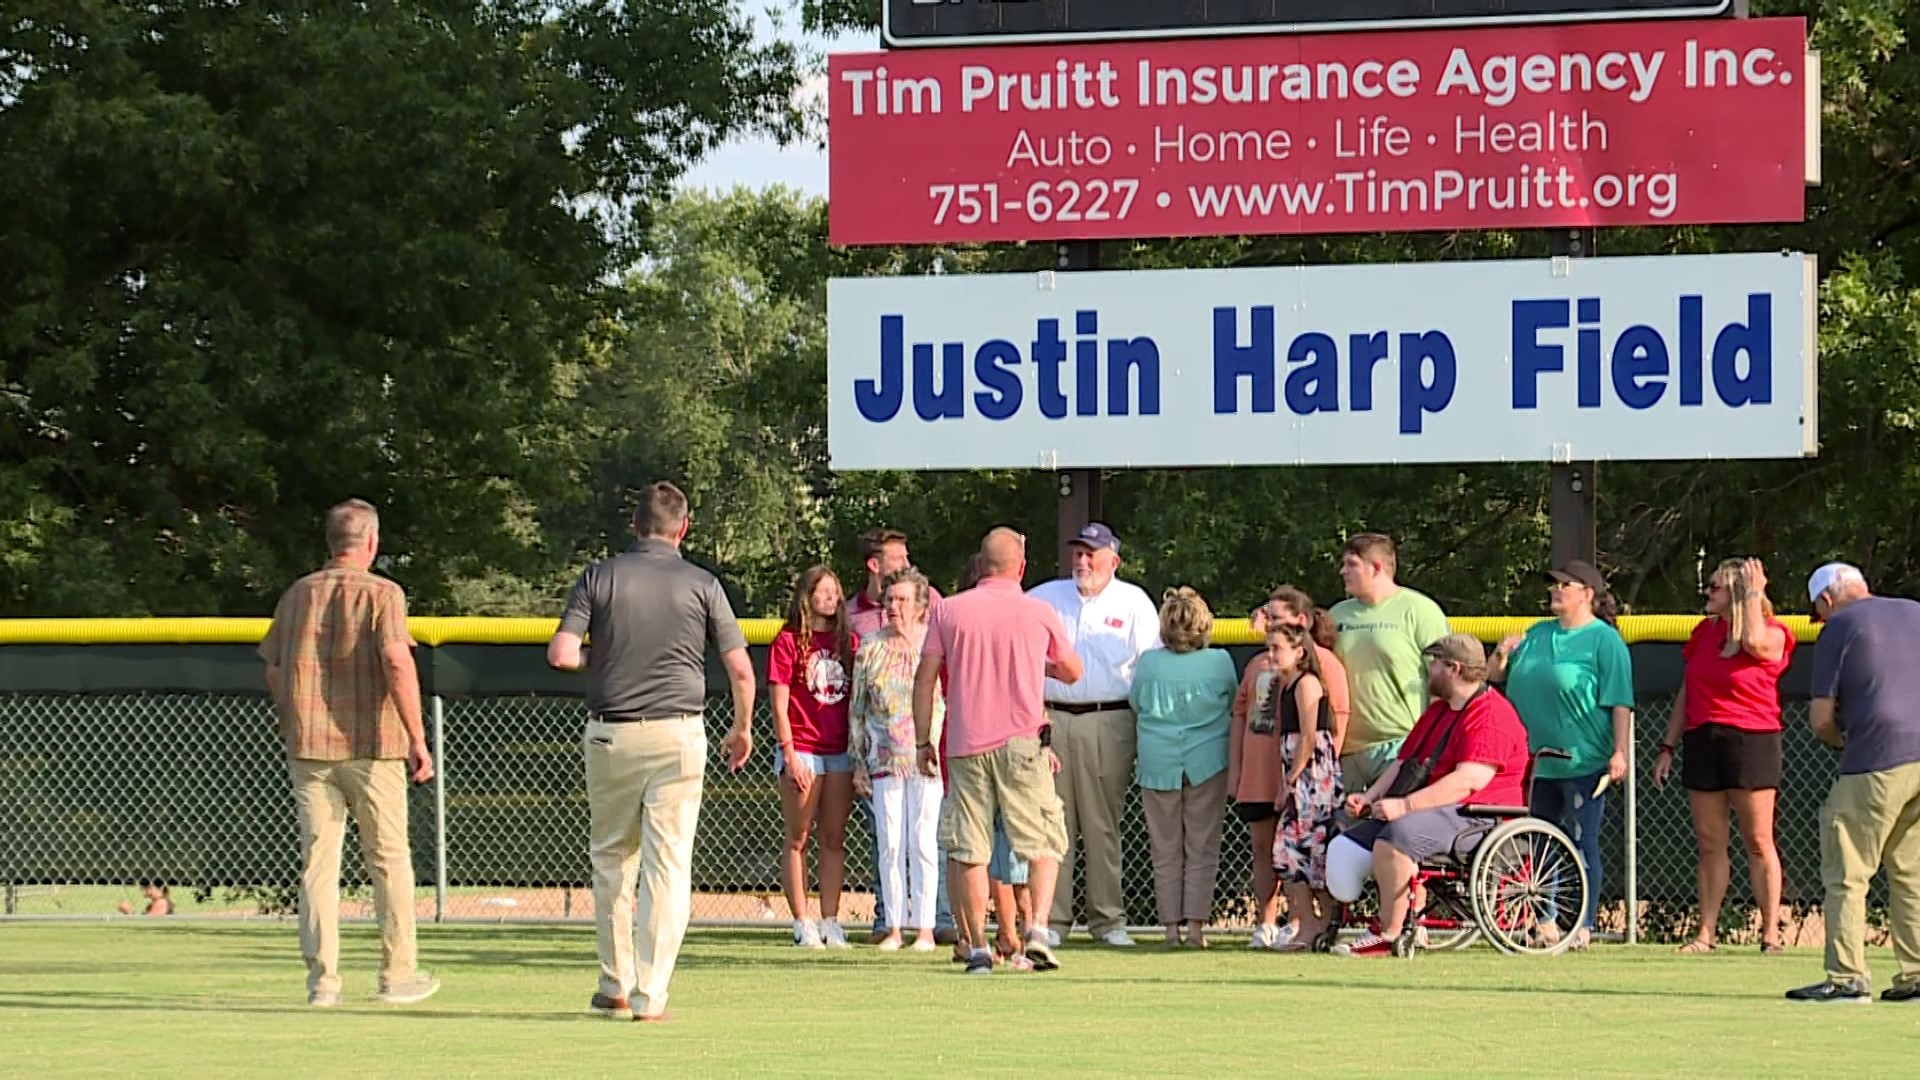 Justin Harp was a volunteer coach from 2008-2016 in a local Kiwanis club and had a passion for youth sports. Now, a baseball field is dedicated in his honor.